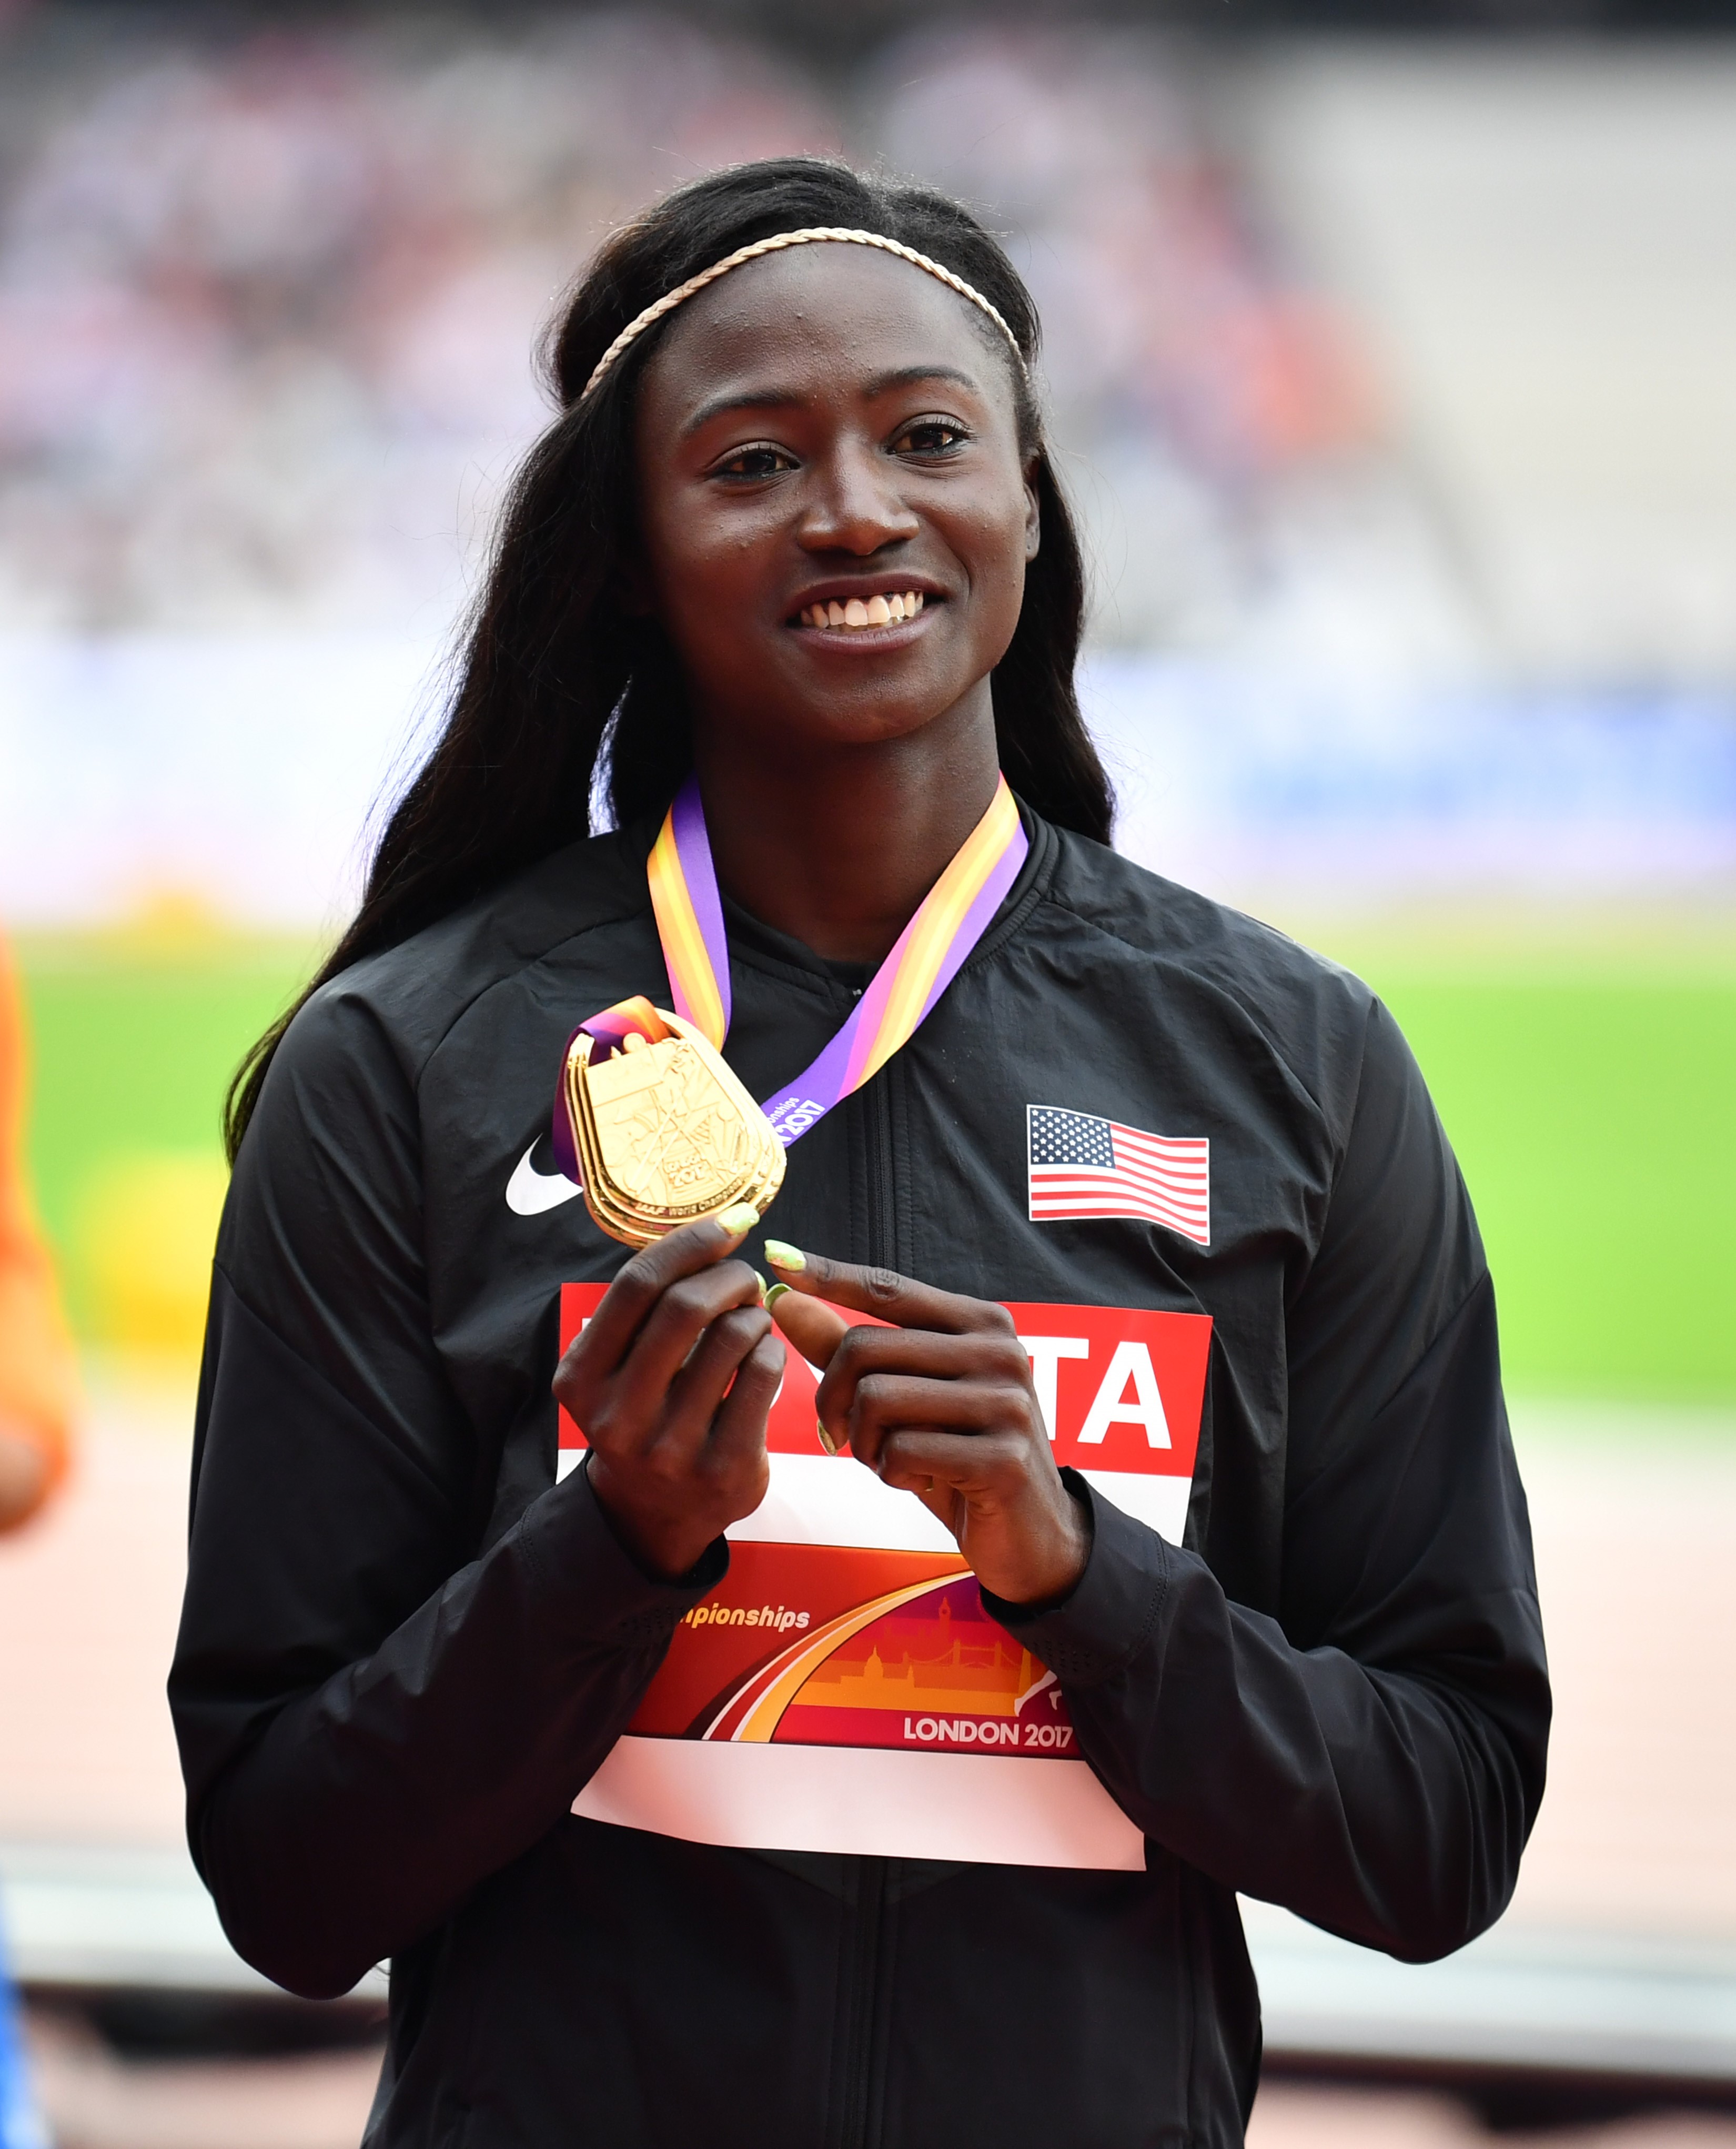 Tori Bowie of the United States poses with her medal for the competes in the Women's 100 metres during the "IAAF Athletics World Championships London 2017" at London Stadium in the Queen Elizabeth Olympic Park in London, United Kingdom on August 7, 2017. | Source: Getty Images